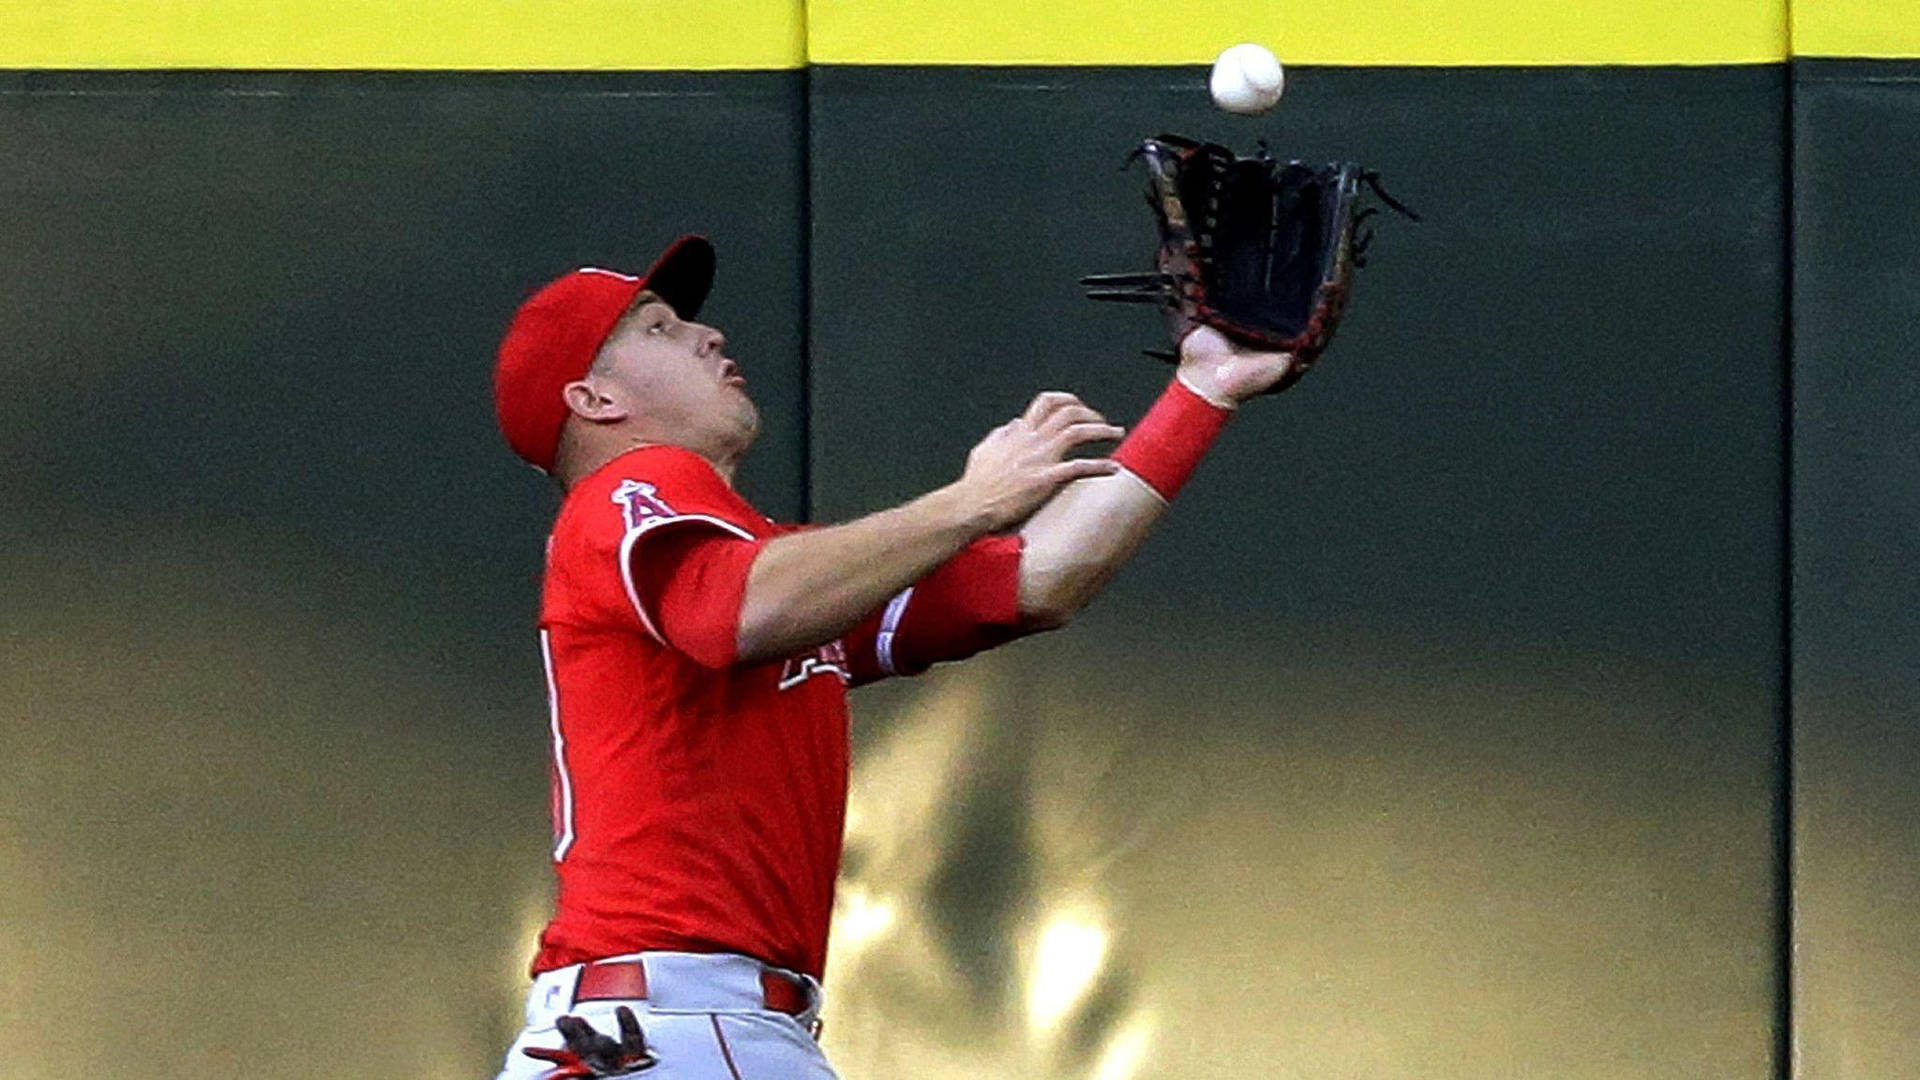 Mike Trout Catching The Ball